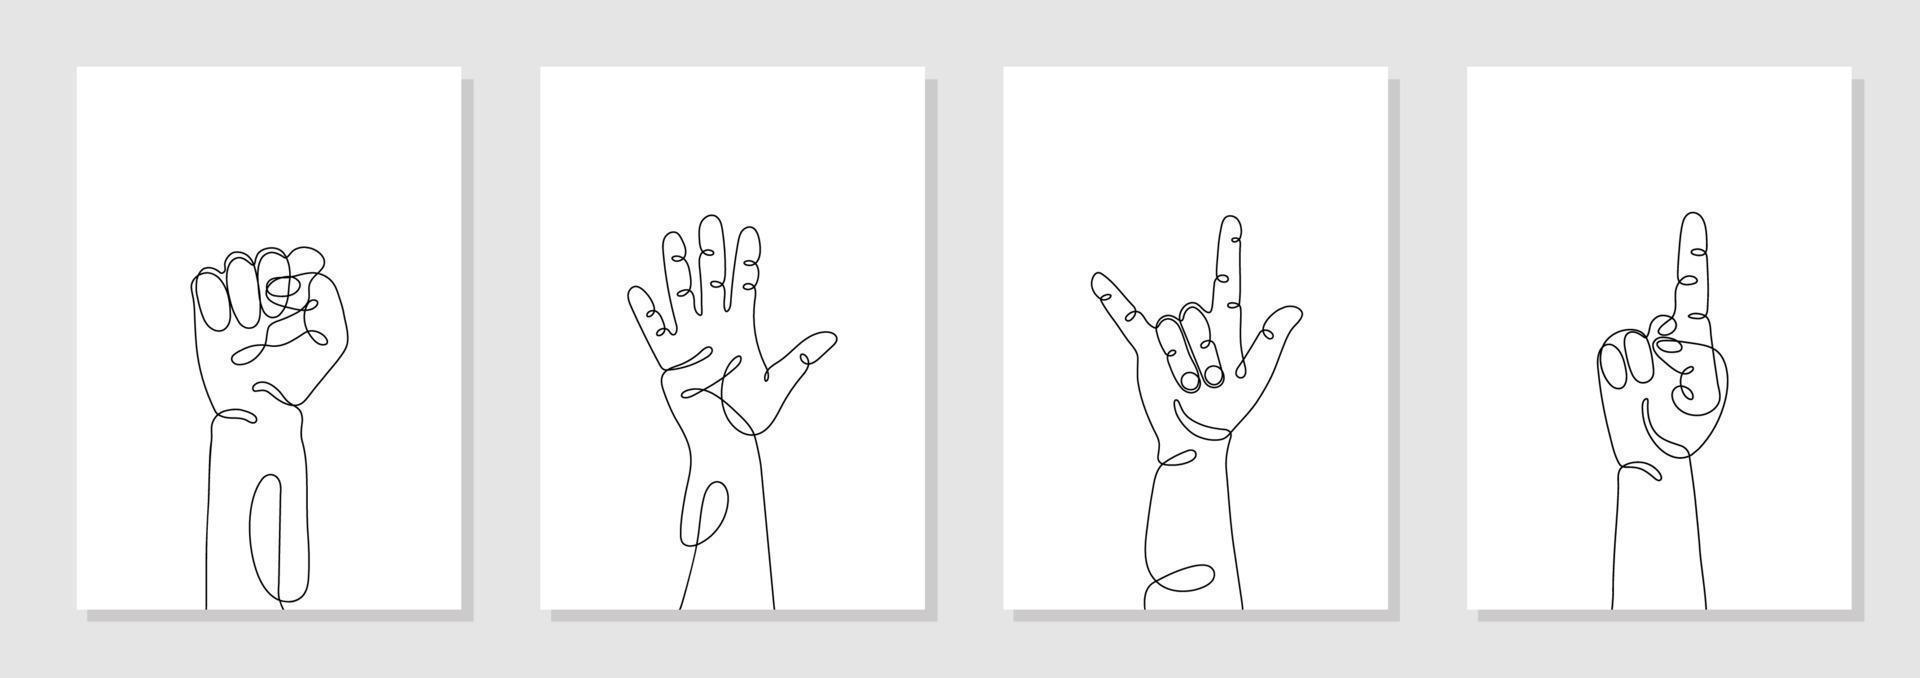 Single line drawn hand gestures set, minimalistic human hands with fist, five, hello, rock, one, pointing. Dynamic continuous one line graphic vector